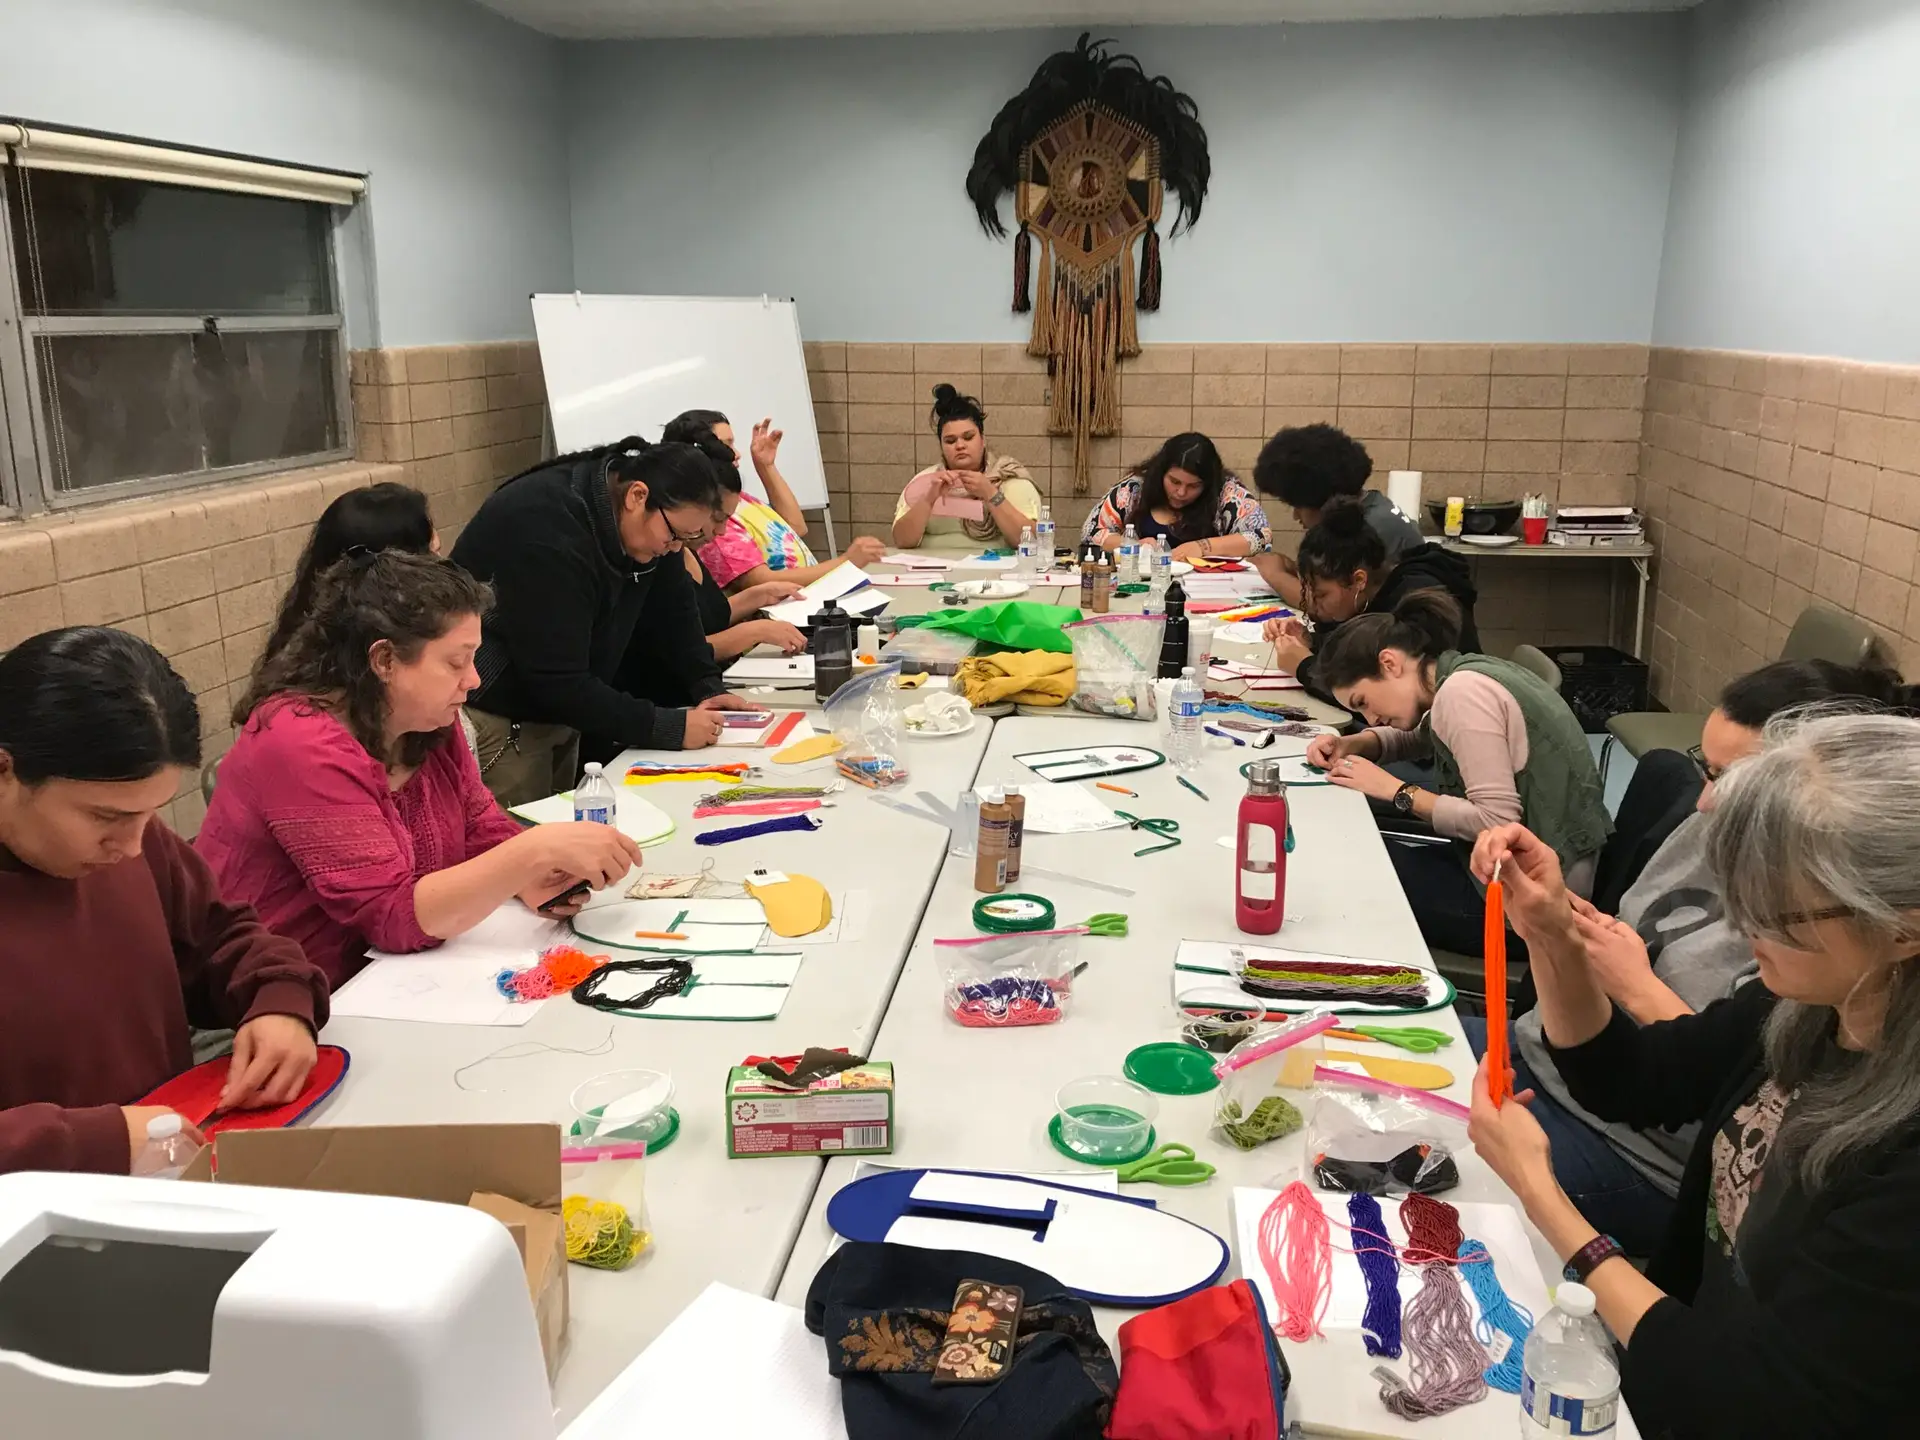 A dozen workshop participants seated around a long table covered with art materials, working on their projects.